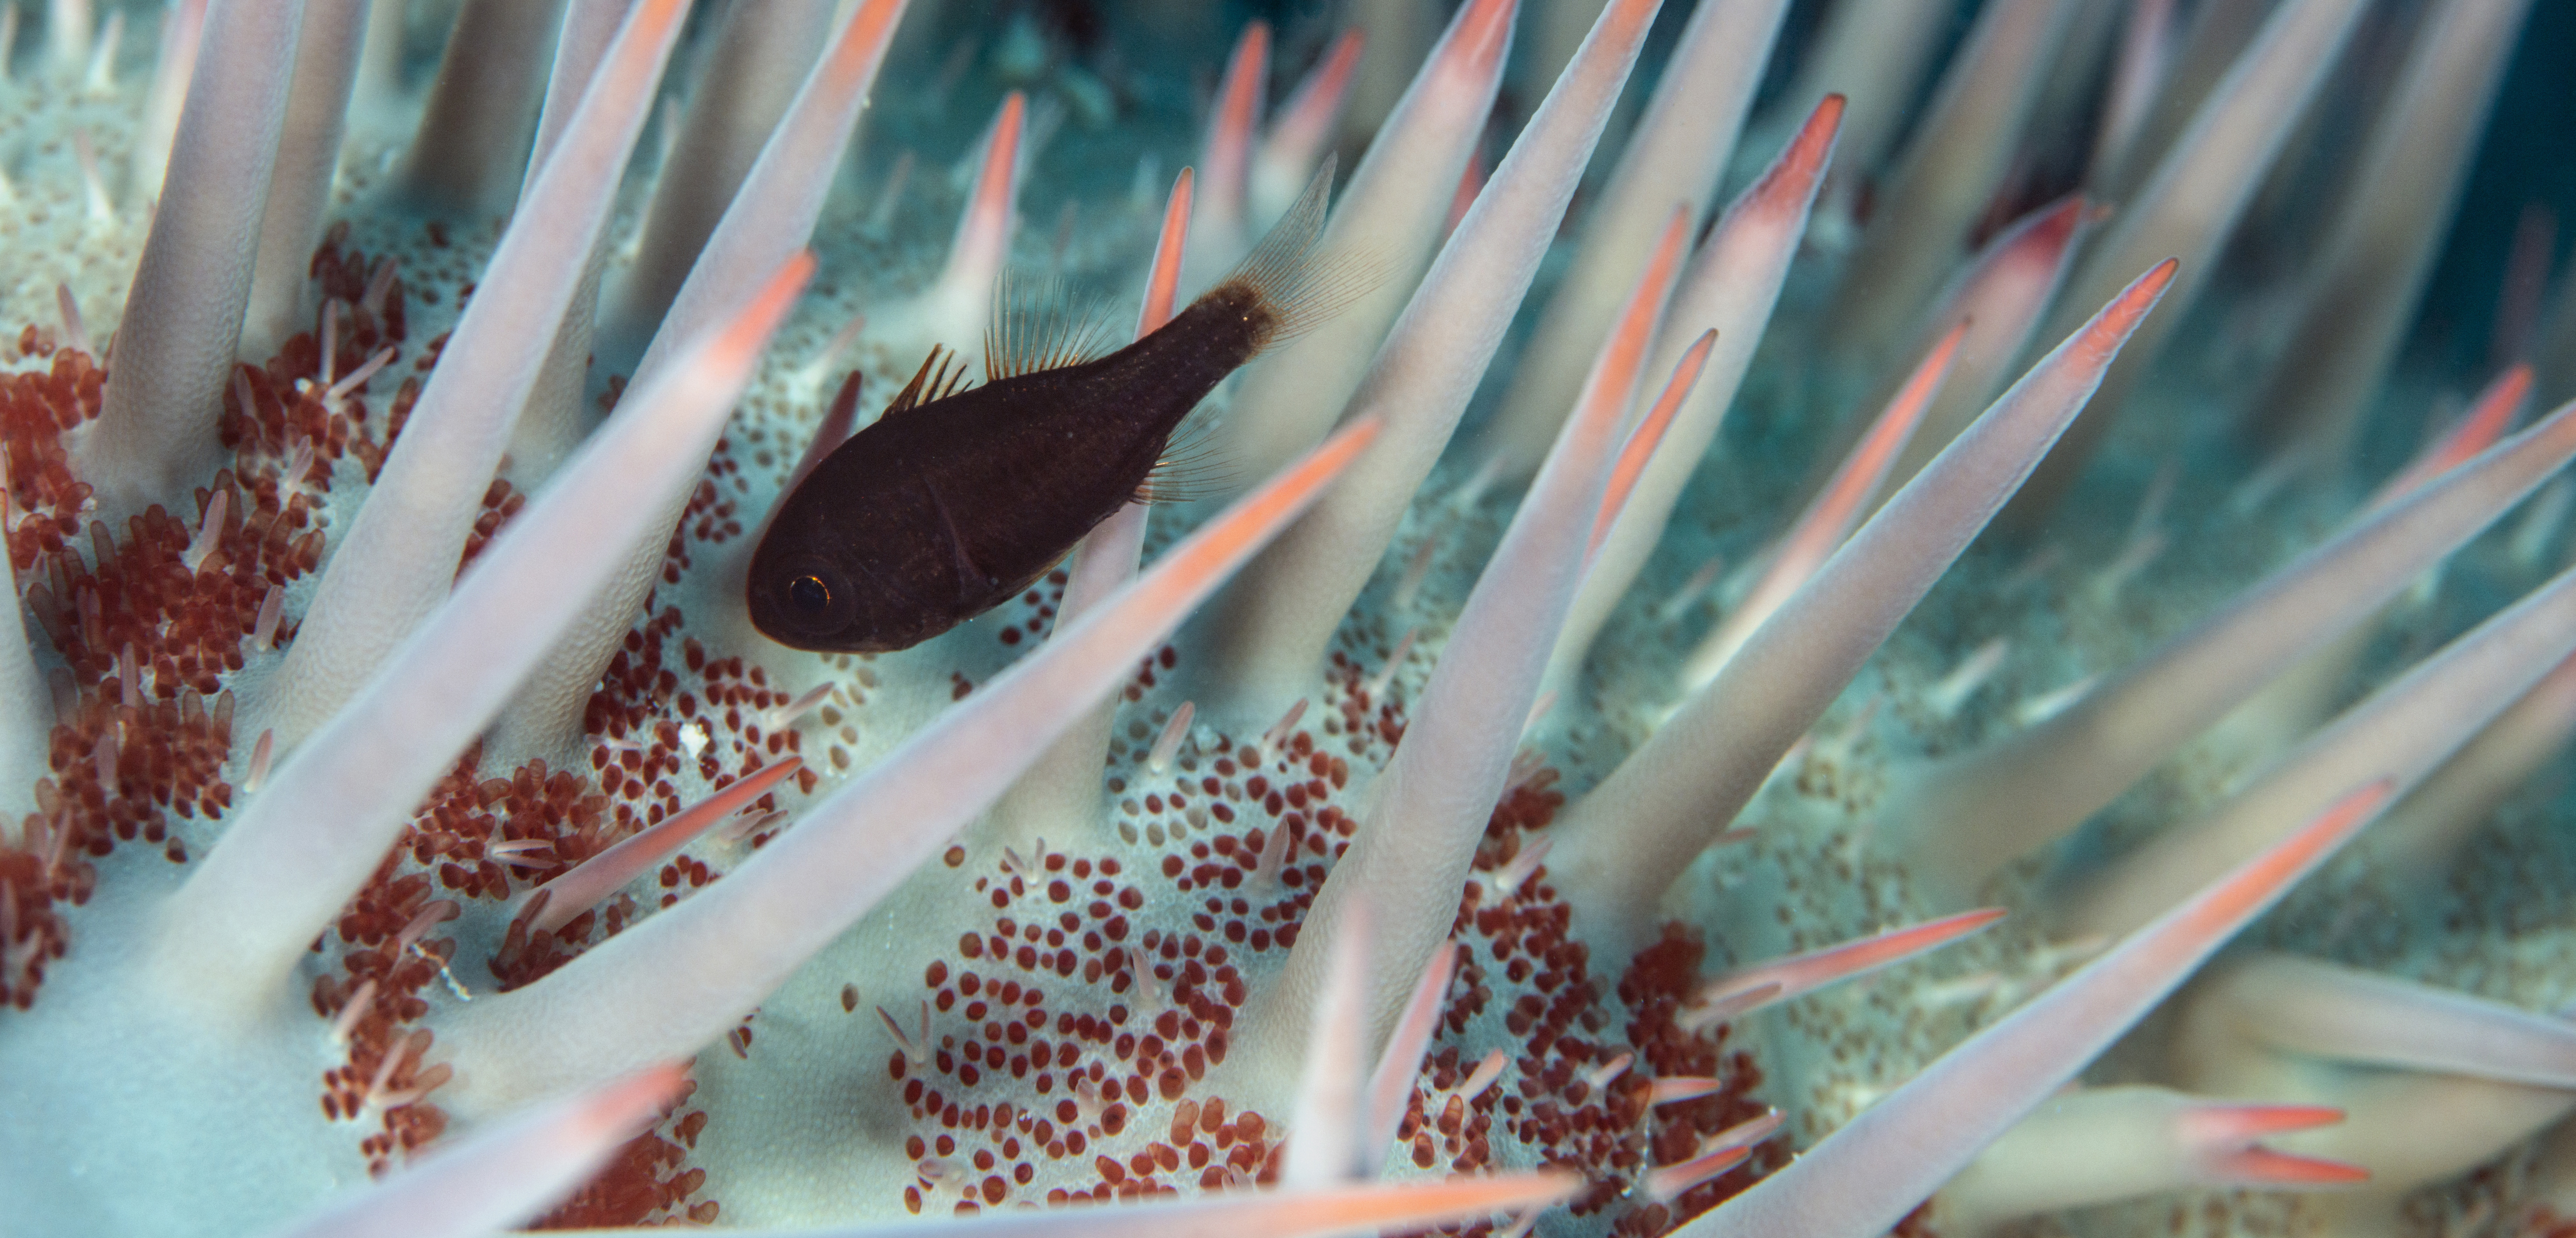 A fish hides out amidst the venomous spines of a Crown of Thorns starfish. Photo by Louise Murray/Robert Harding World Imagery/Corbis